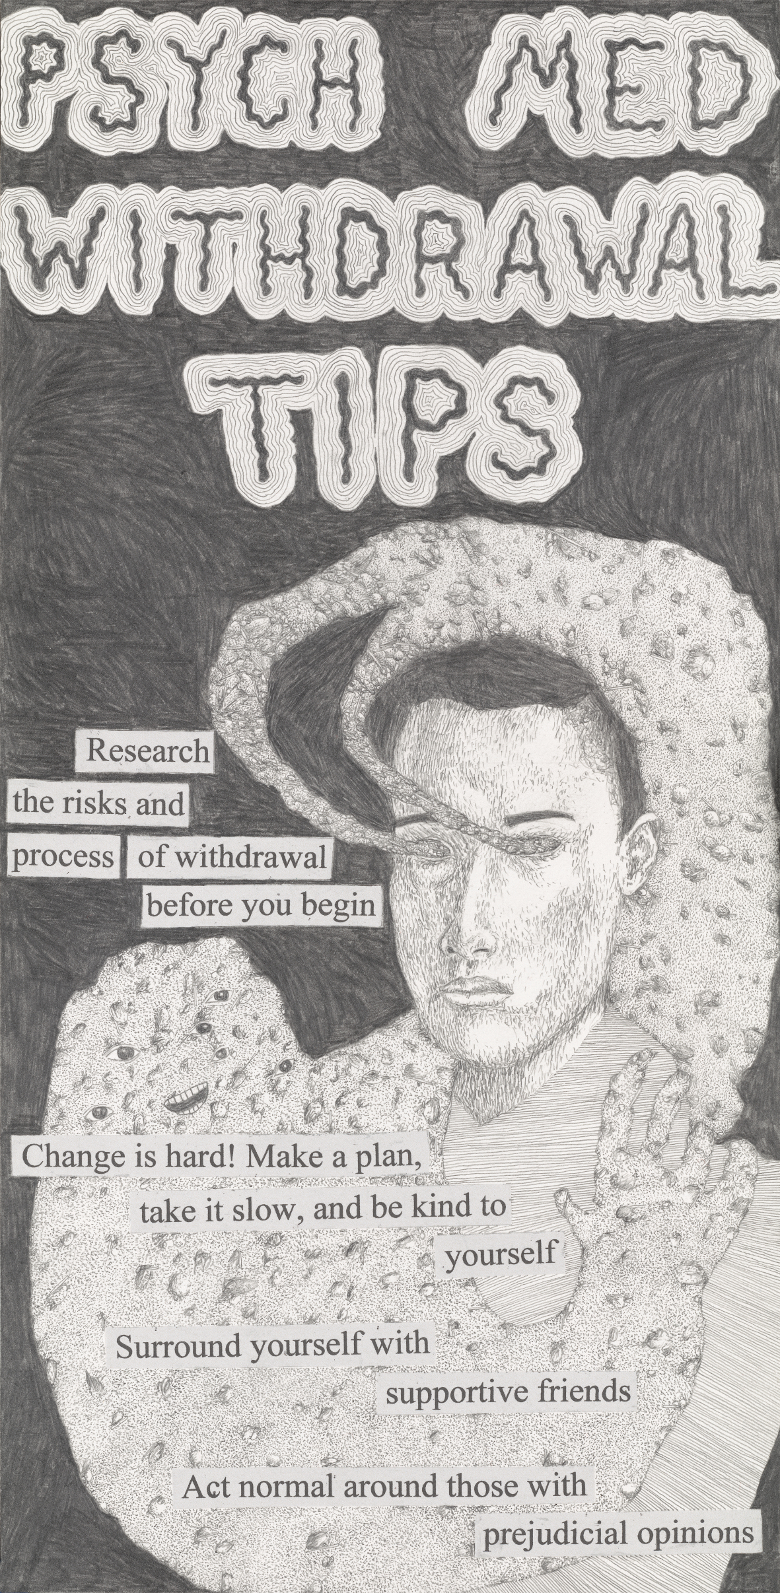 Detailed pencil drawing of a person with a smiling, cloudy dirt-monster billowing from
            their eyes. Text in image is reproduced below.